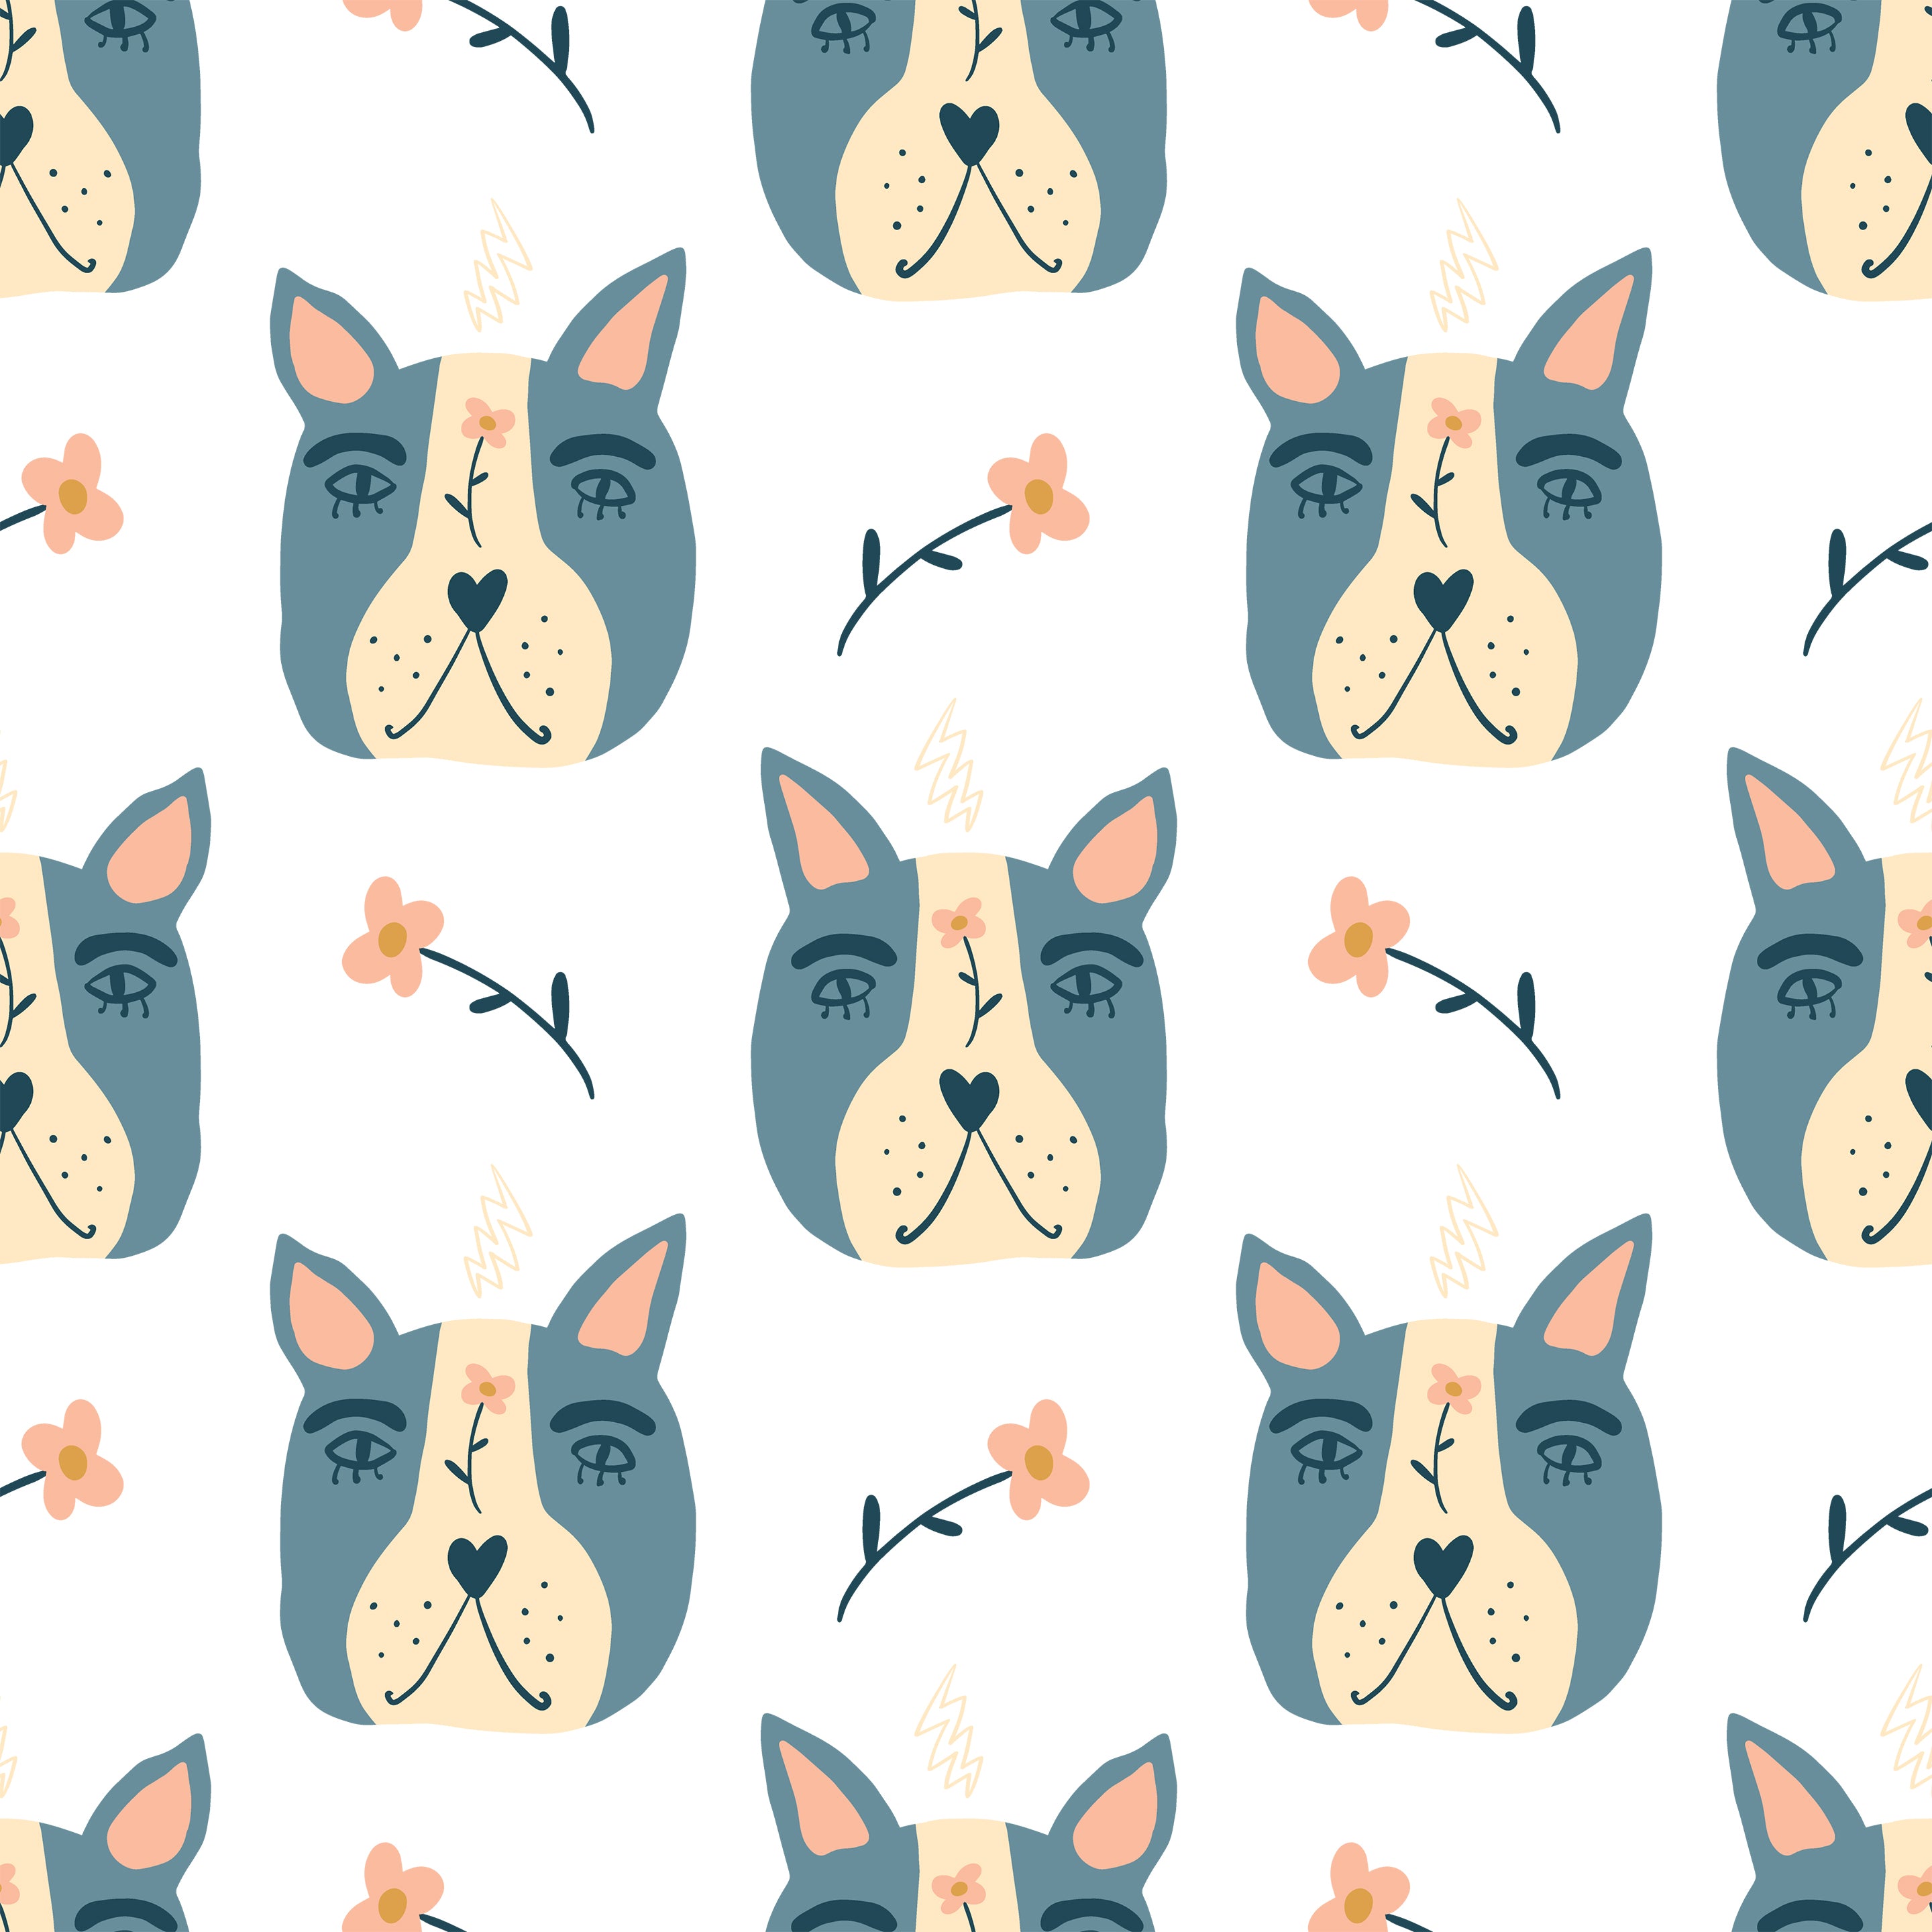 Playful and endearing wallpaper pattern from 'Dogs Wallpaper 47' featuring stylized blue and cream dog faces interspersed with pink floral motifs and small lightning bolts on a white background. This charming design is ideal for adding a touch of whimsy and color to any room.